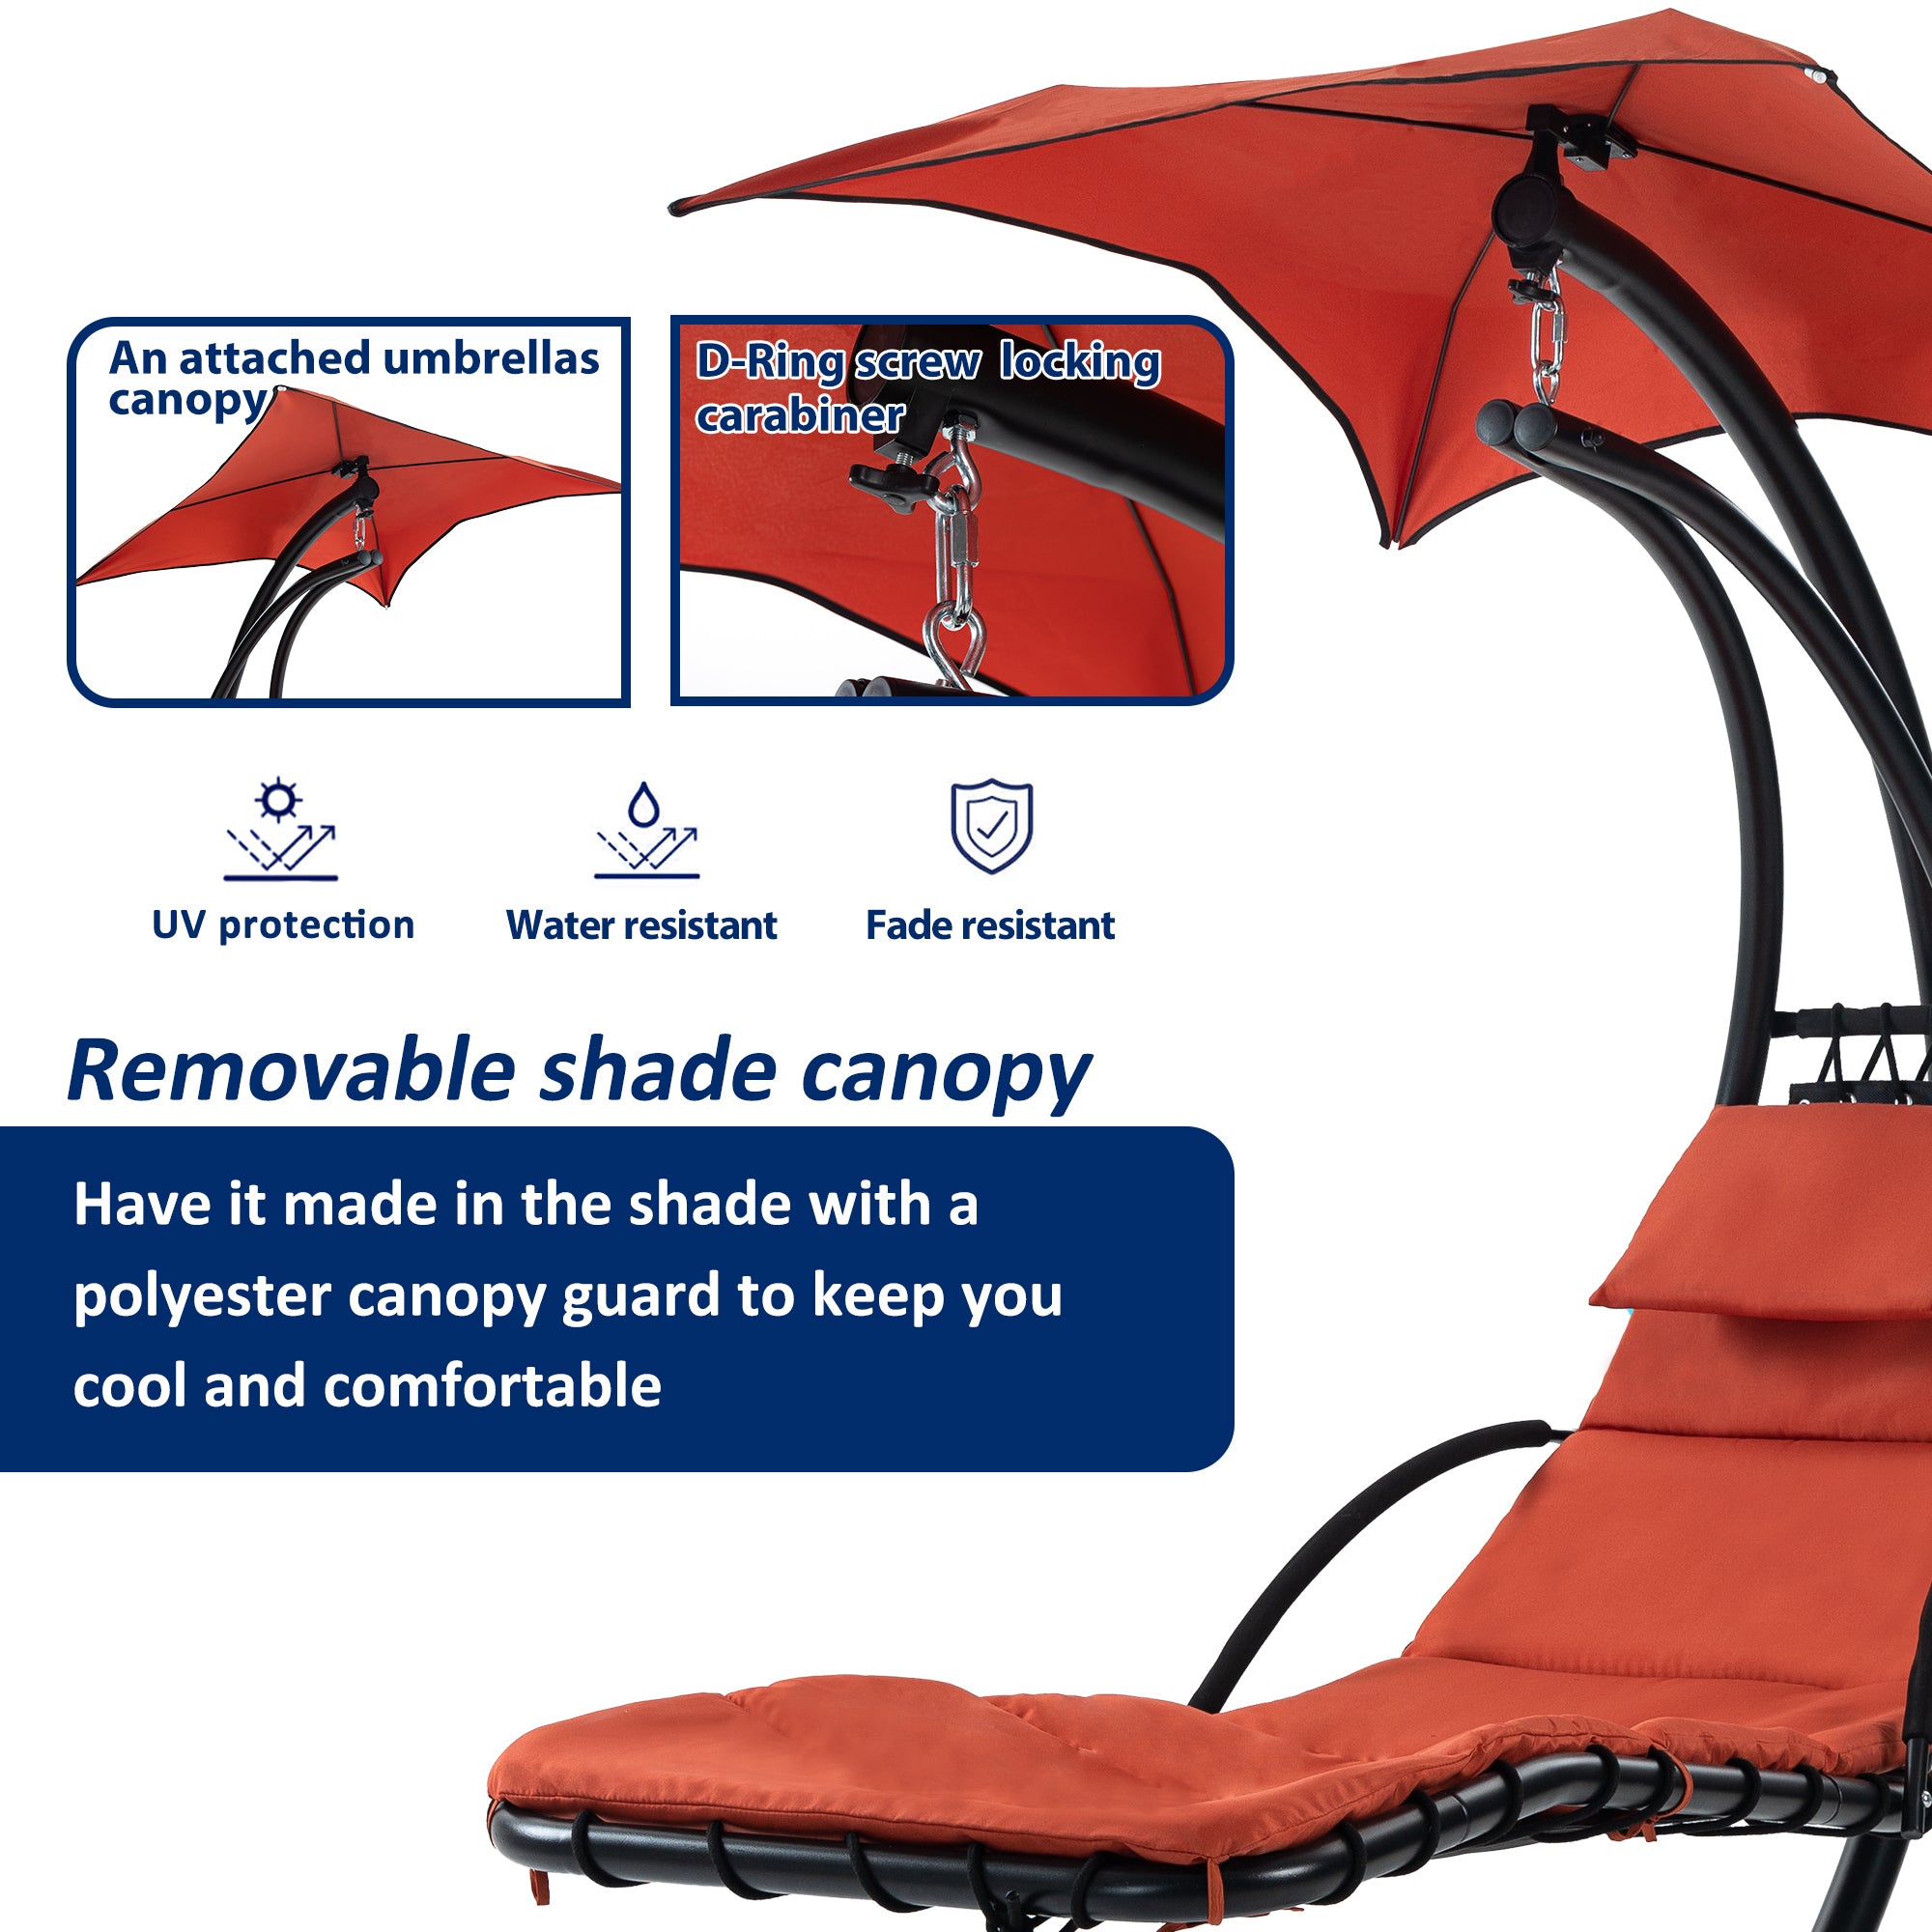 Hanging Chaise Lounger with Removable Canopy, Outdoor orange-metal